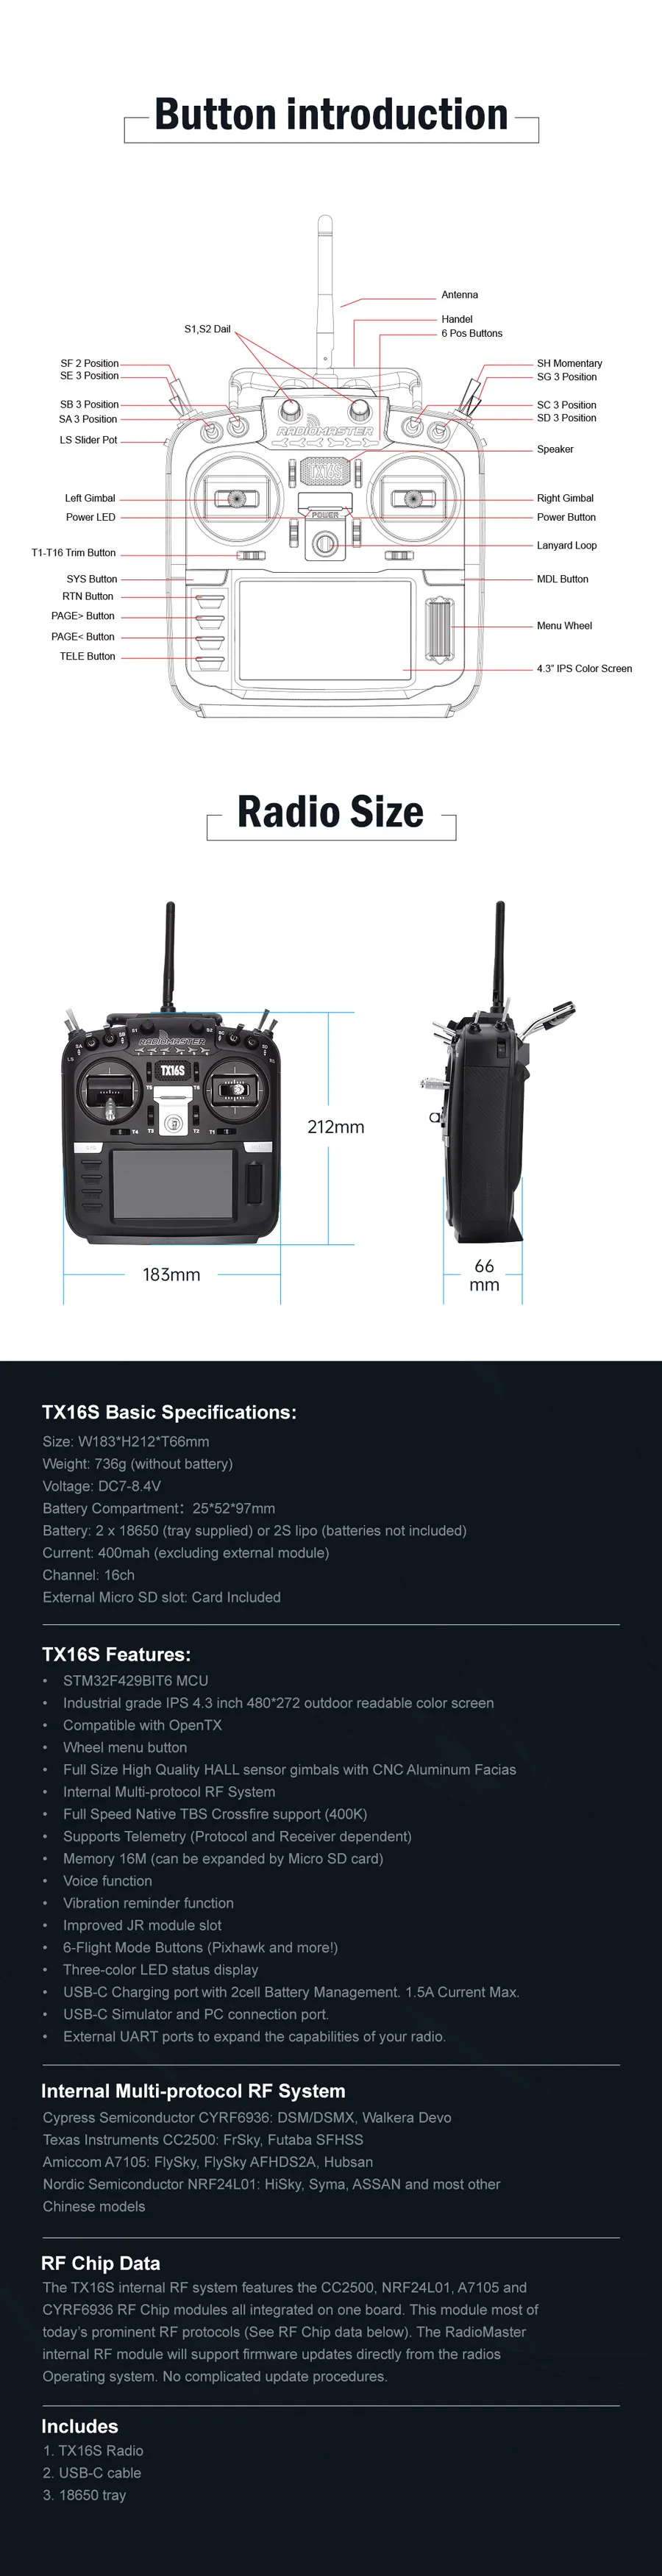 RadioMaster TX16S Mark 2 HALL 4-in-1 + Touch version 16ch 2.4ghz Multi-protocol OpenTX